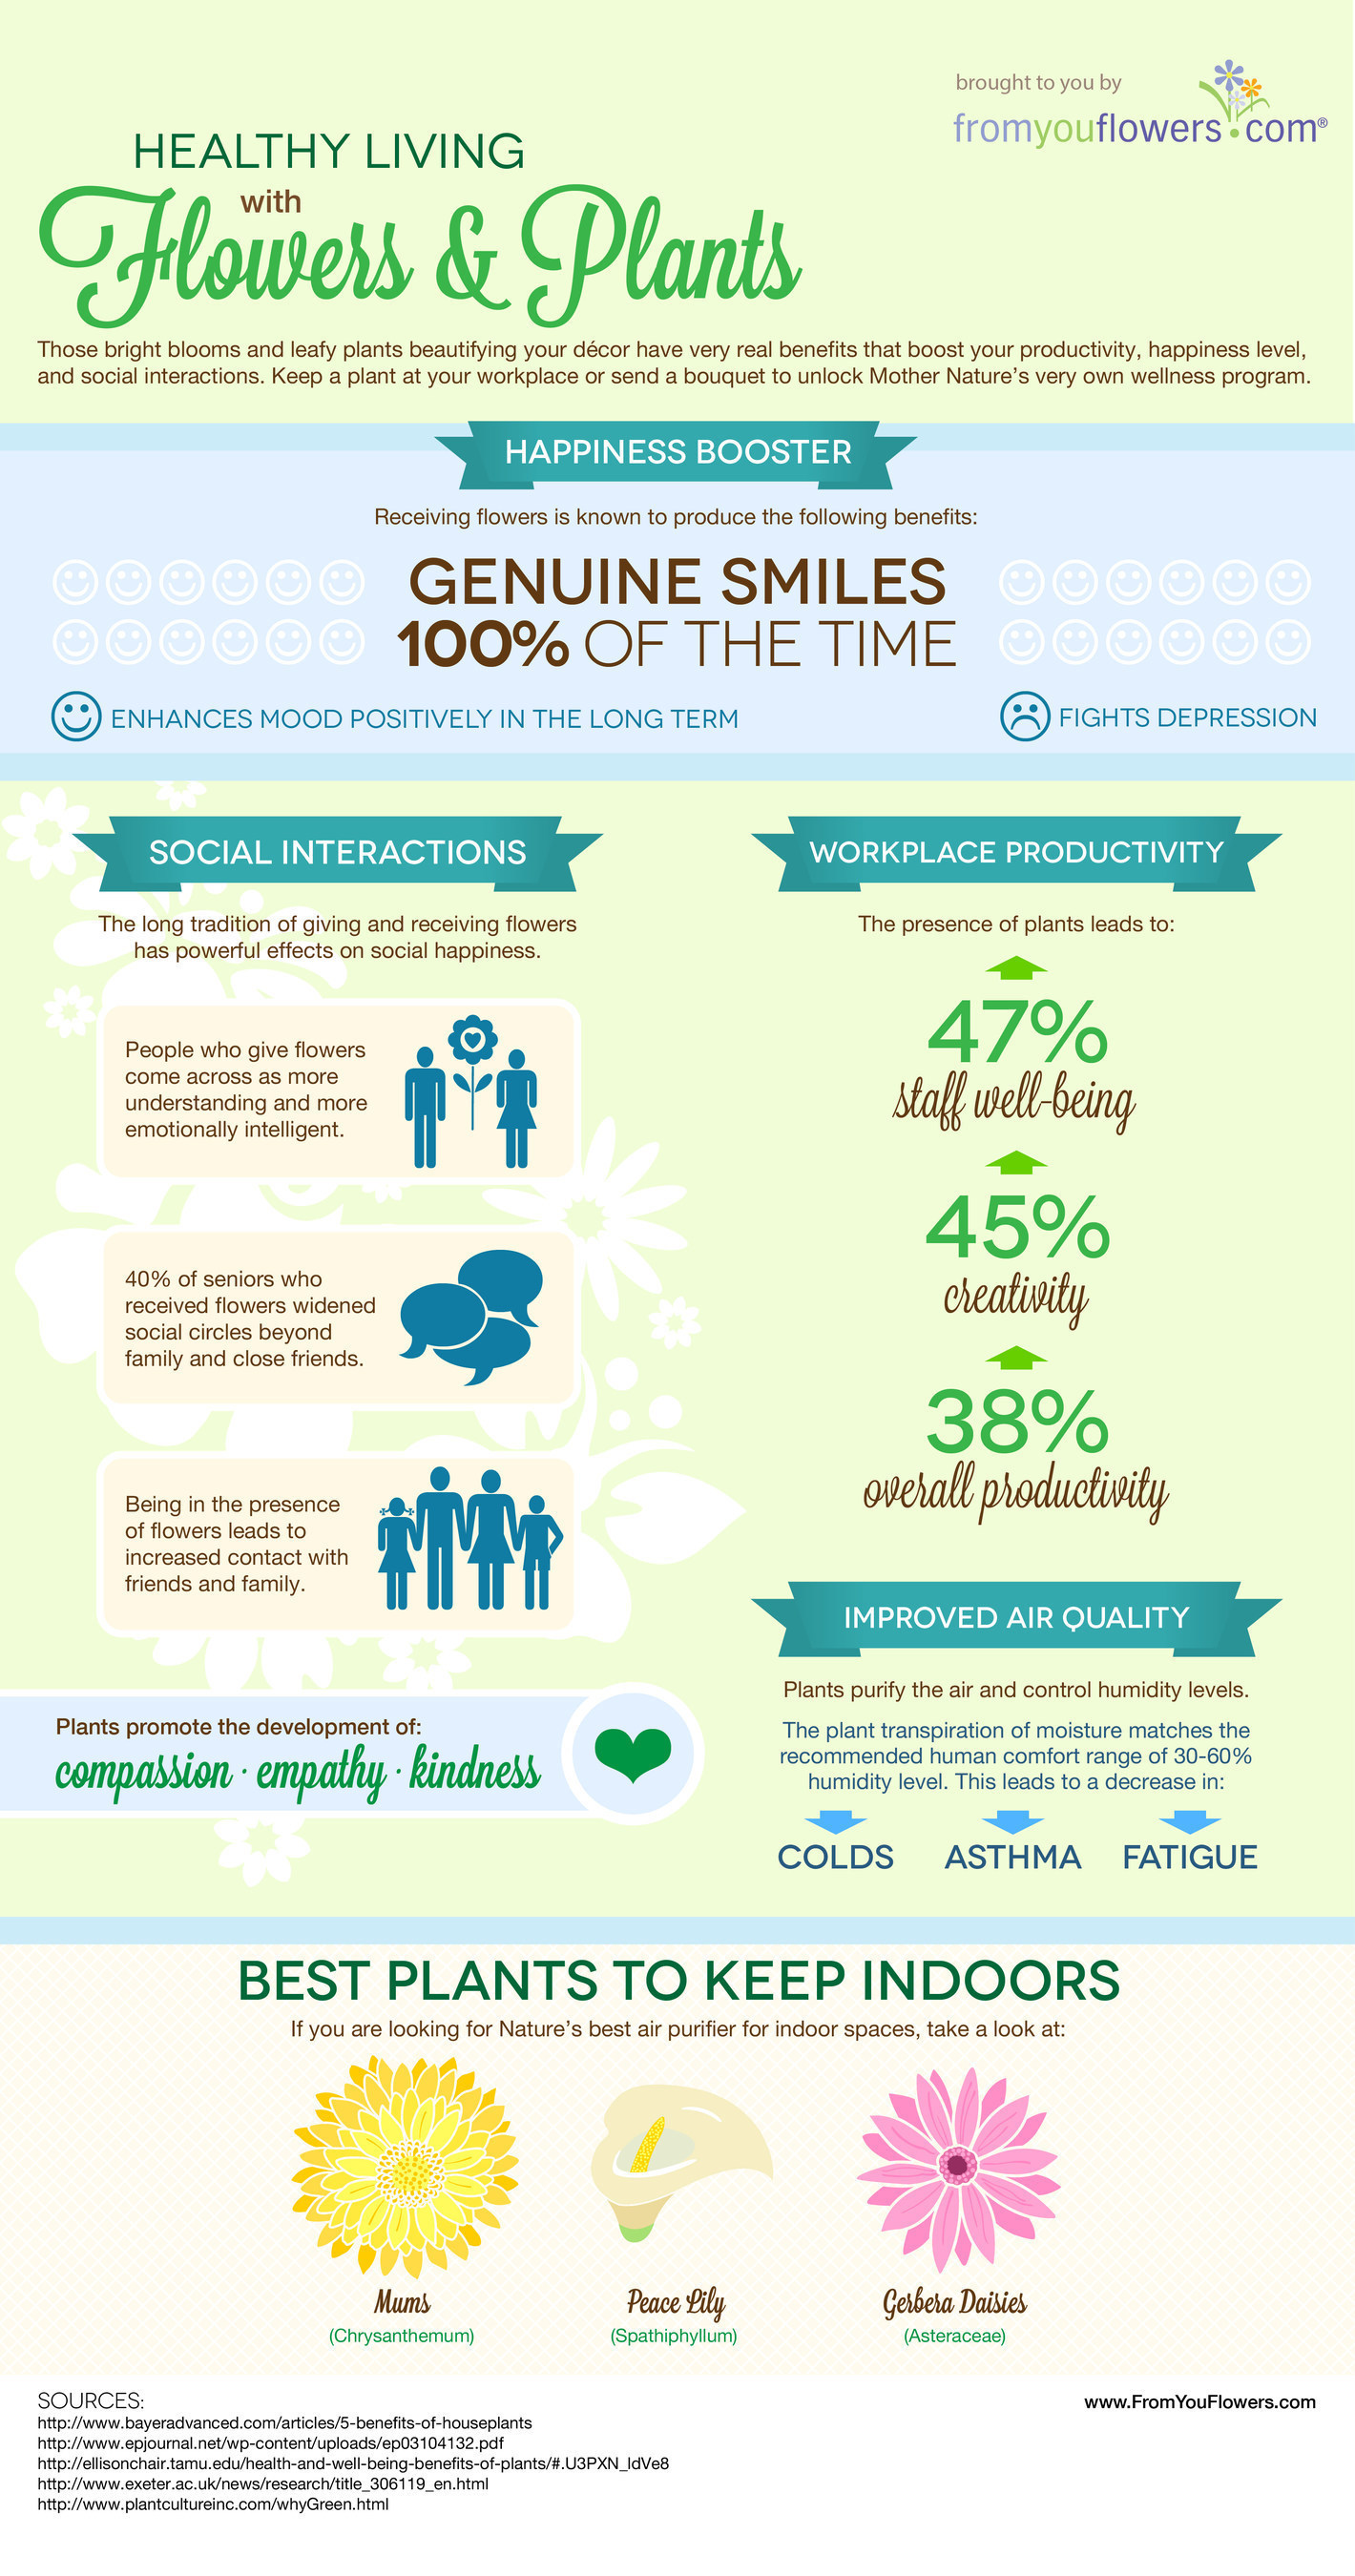 From You Flowers Publishes Summer 2014 Healthy Living with Flowers & Plants Infographic. (PRNewsFoto/FromYouFlowers.com)